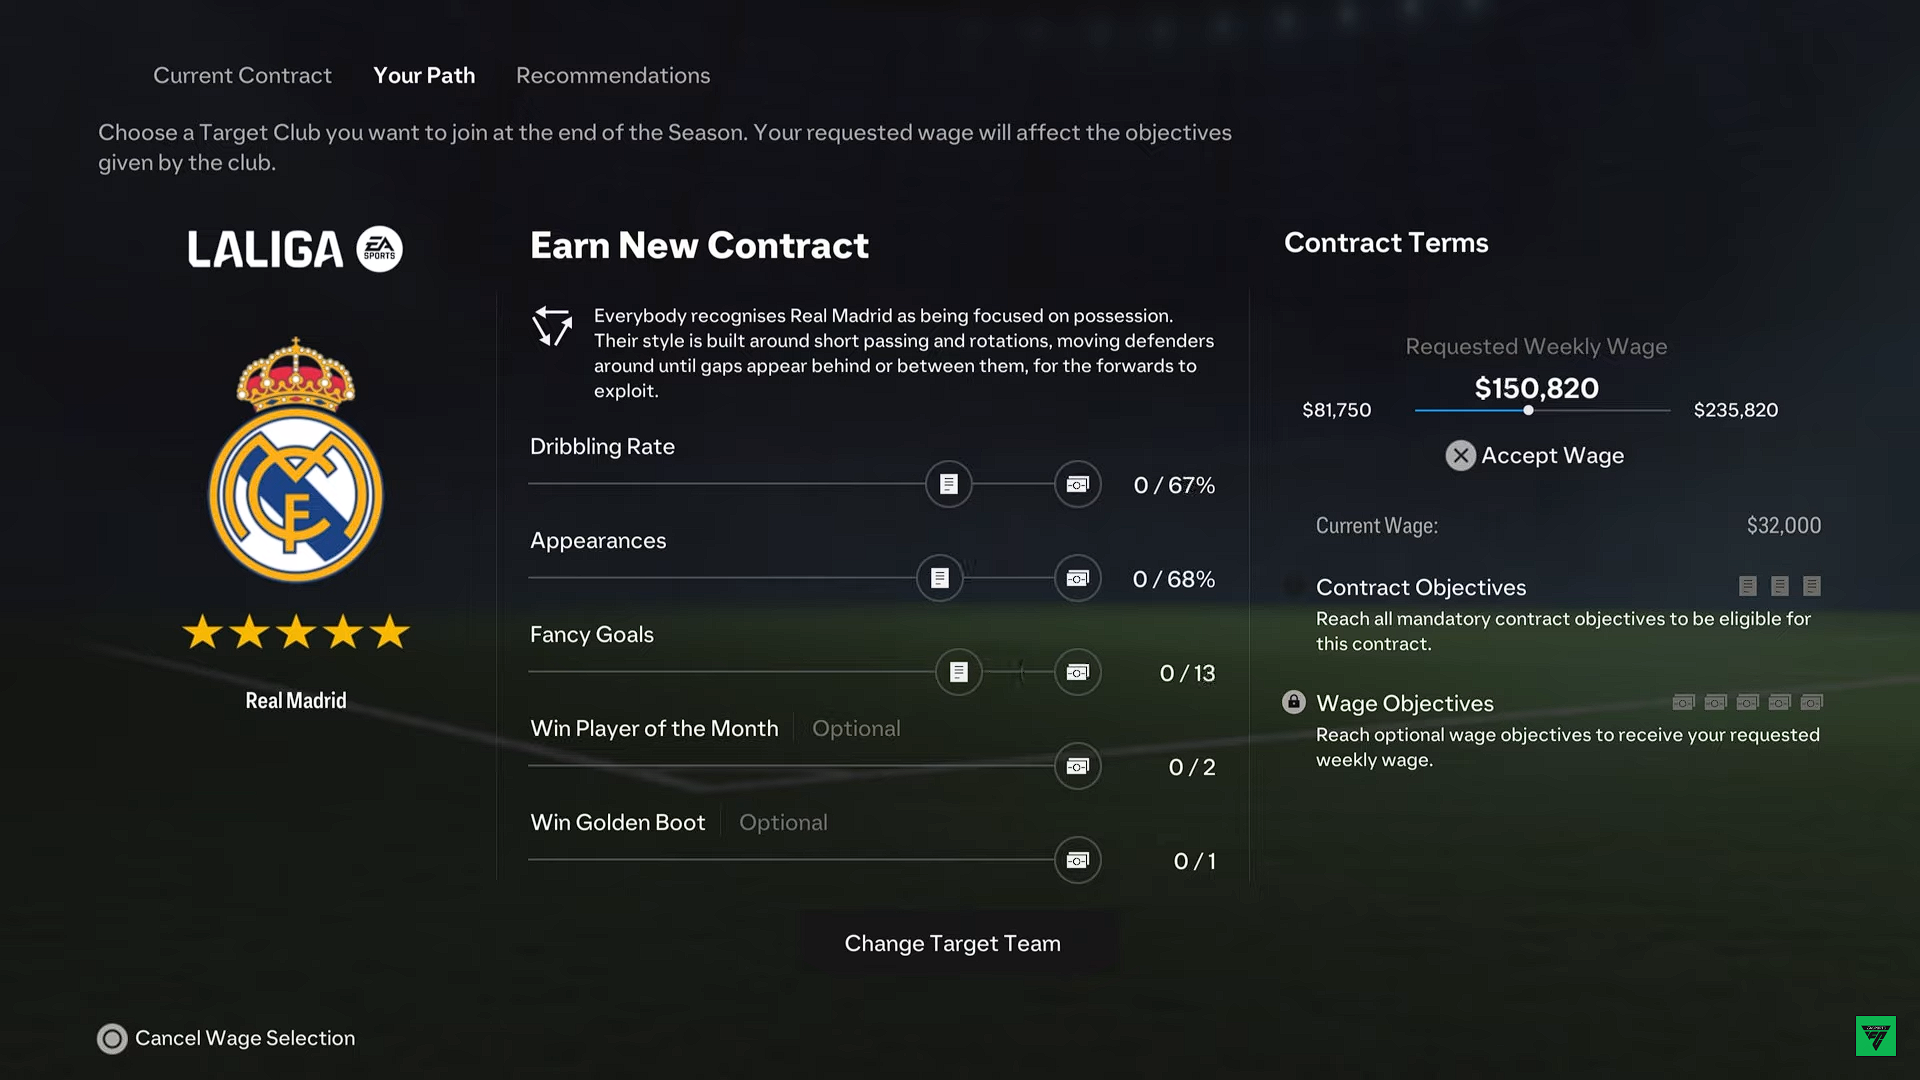 YOU CAN NOW WIN THE BALLON D'OR ON FC 24 - Career Mode Trailer